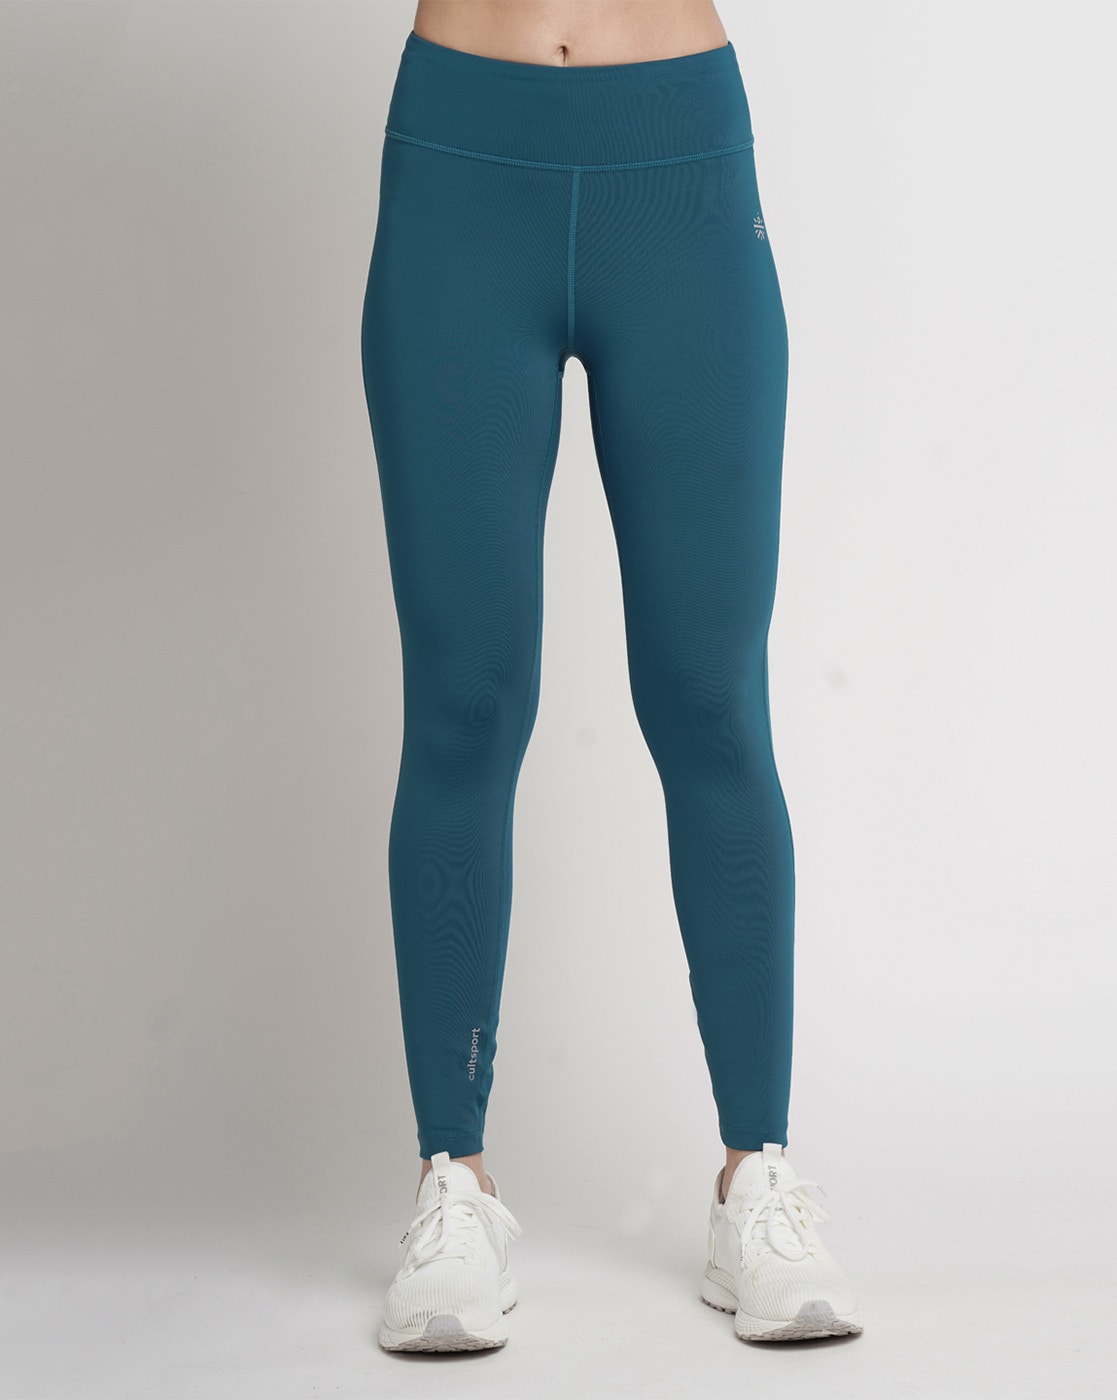 adidas Women's Athletics Workout Pants (32- Blue) in Ludhiana at best price  by Kudu Knit Process Pvt. Ltd. - Justdial